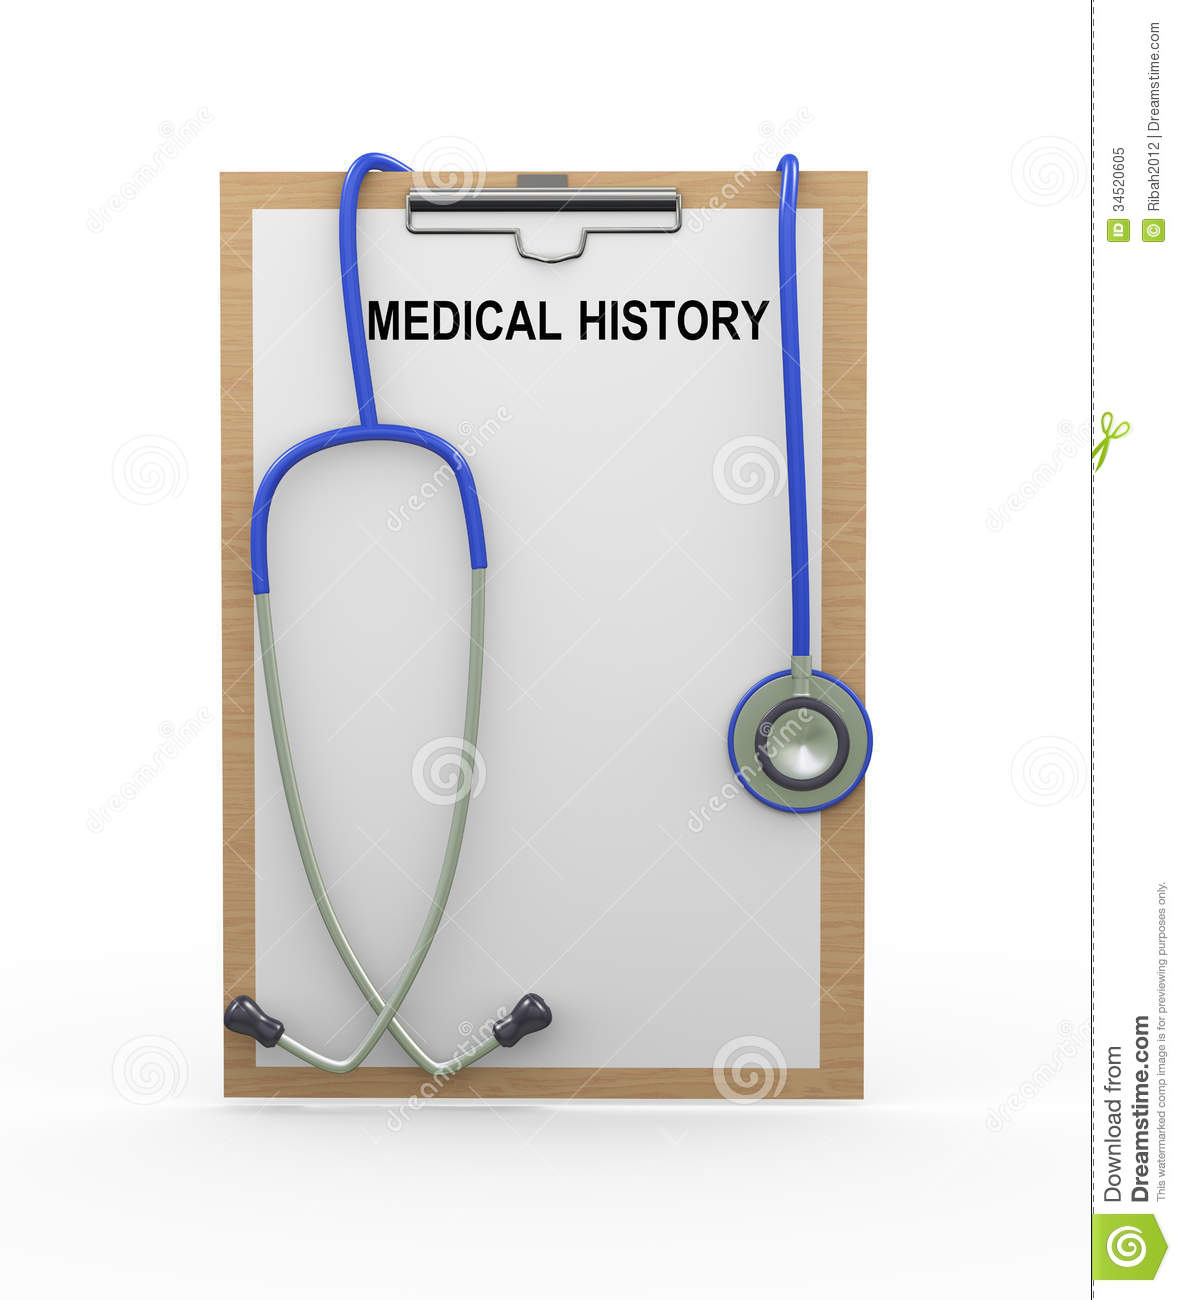 44 Stethoscope Cliparts